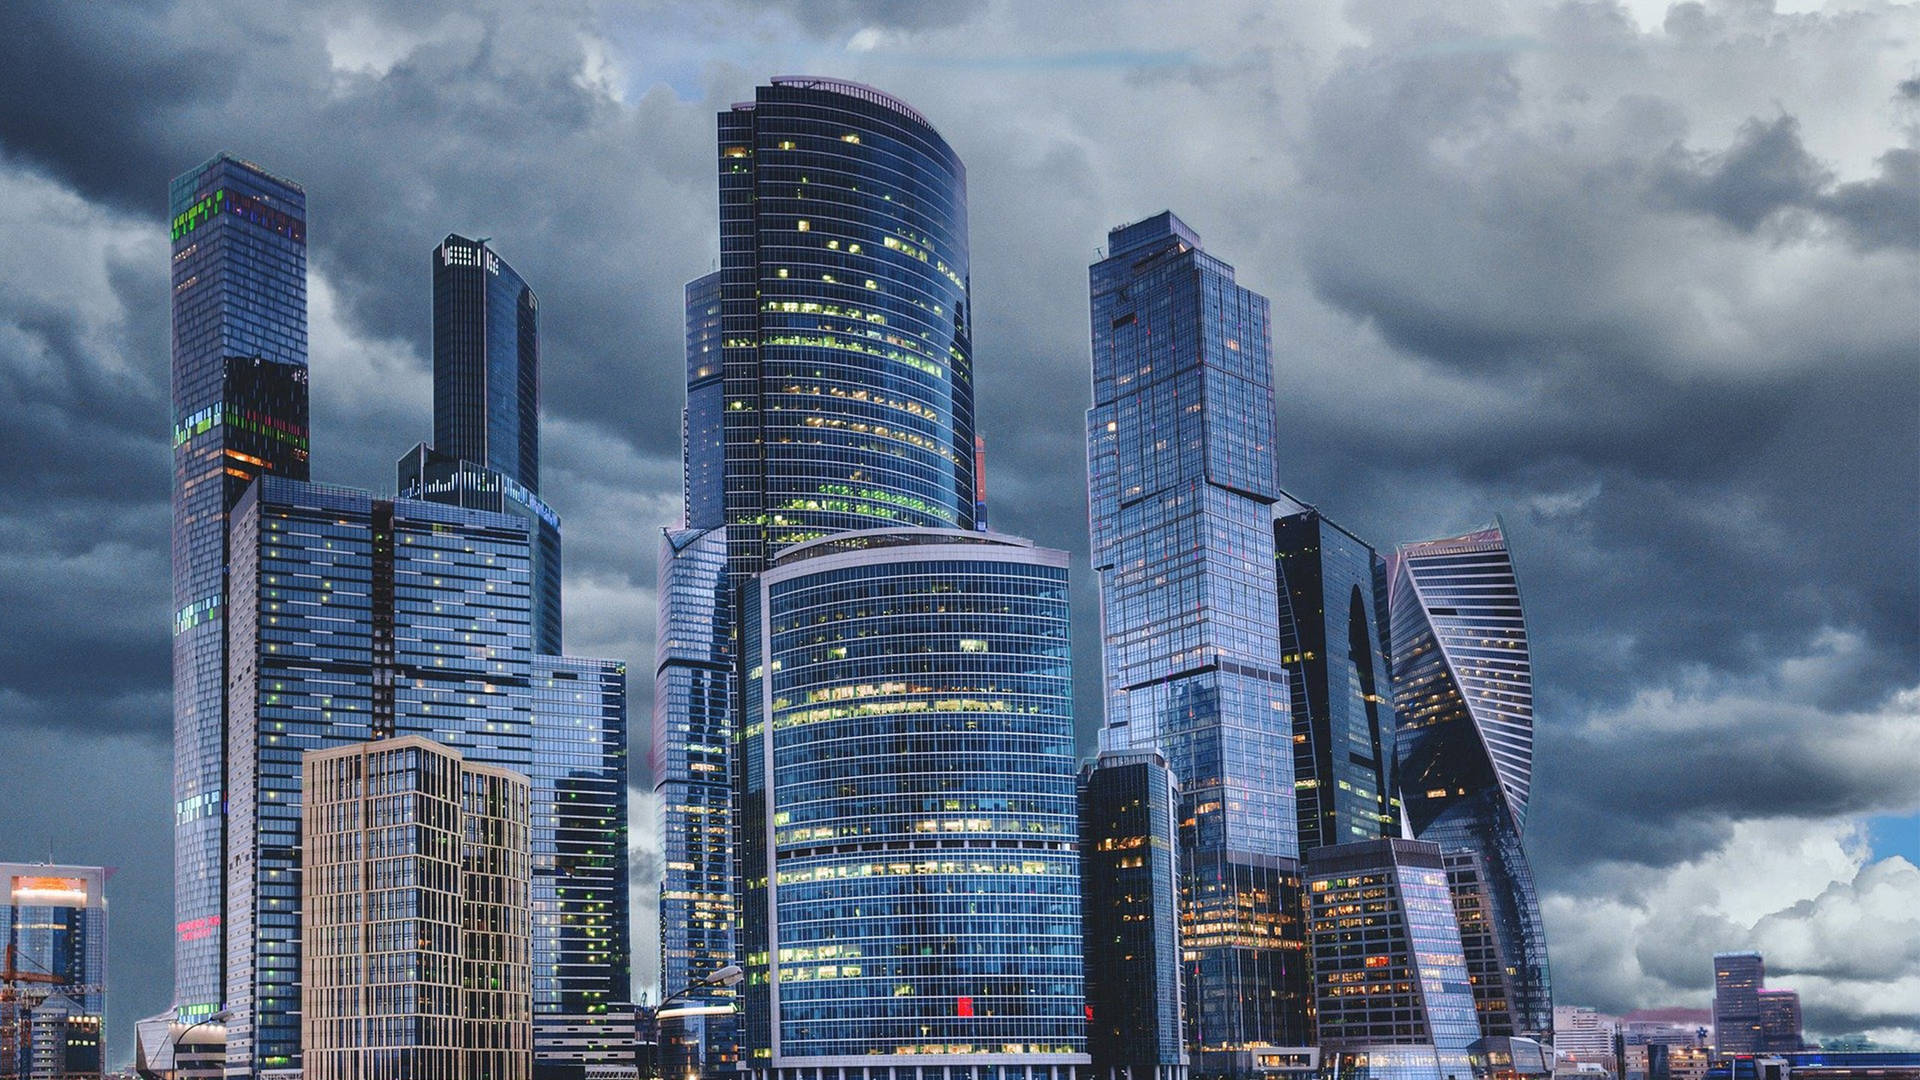 Architecture Moscow City Megalopolis Wallpaper